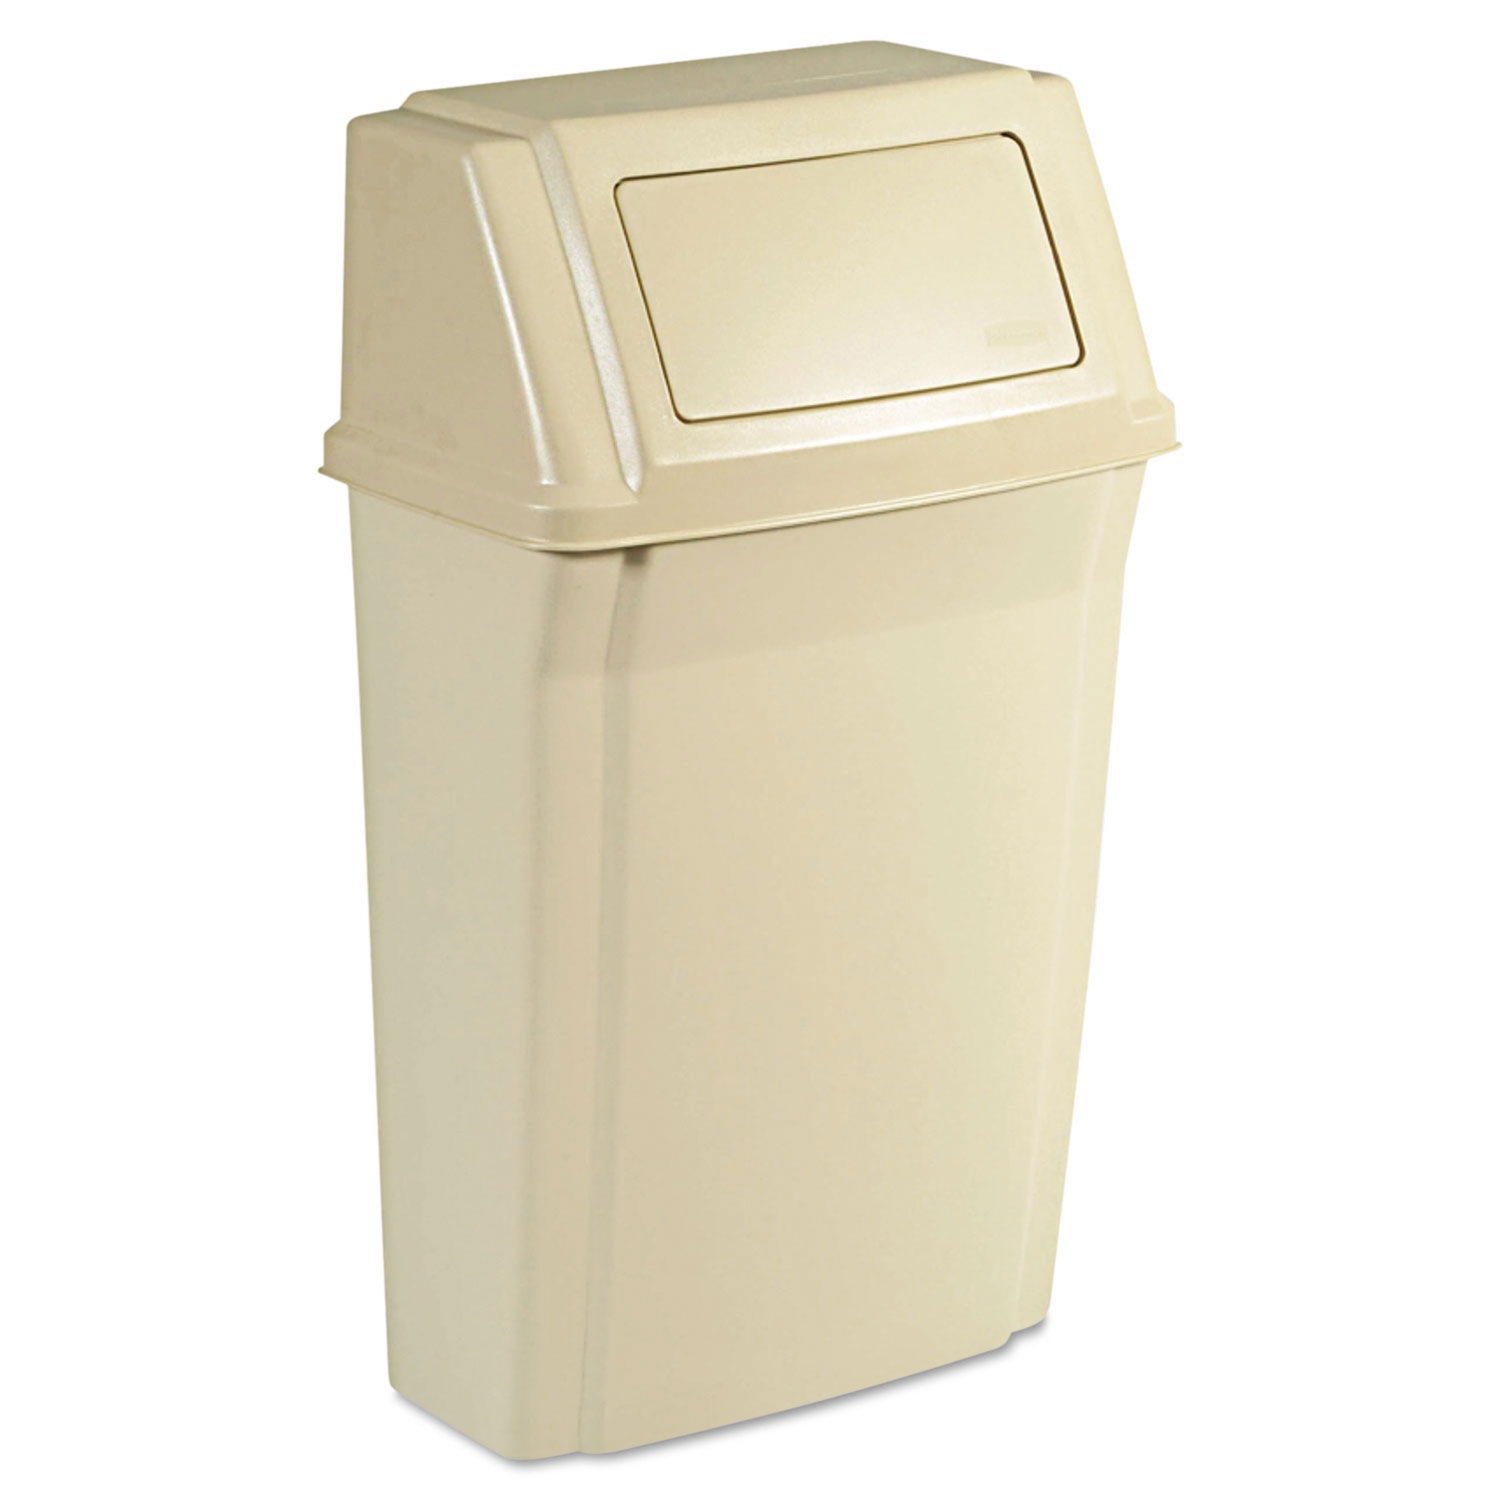  Rubbermaid Commercial FG782200BEIG Slim Jim Wall-Mounted Container, Rectangular, Plastic, 15 gal, Beige (RCP7822BEI) 